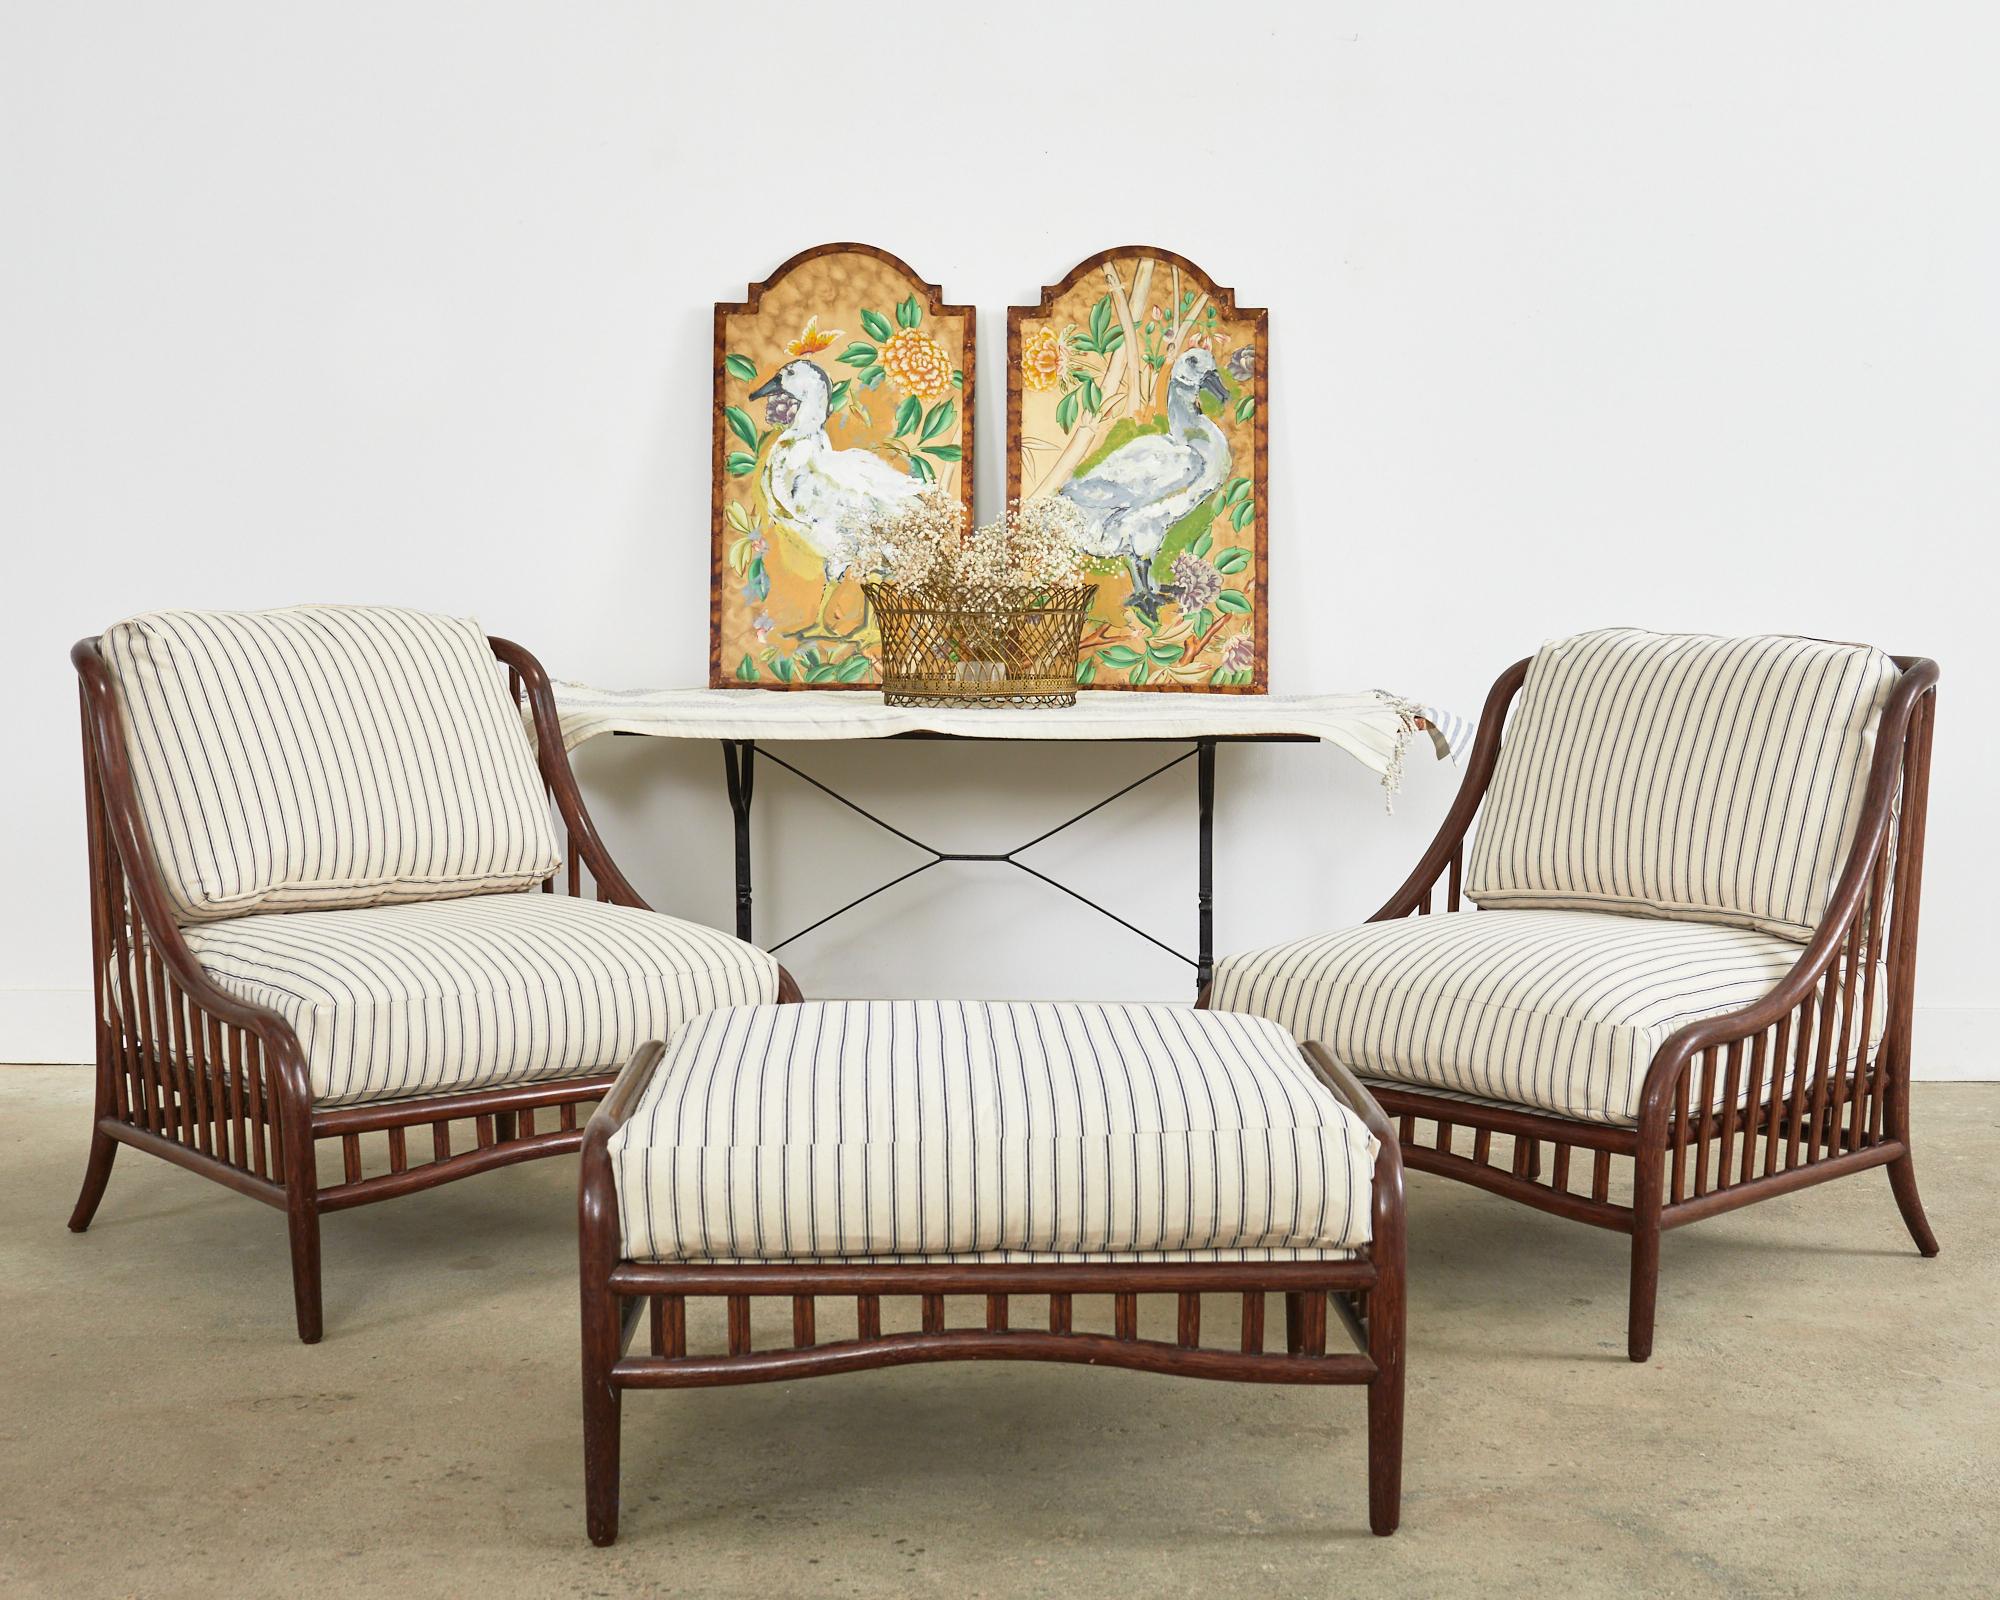 Exceptional pair of genuine McGuire rattan lounge chairs with a matching ottoman made in the California organic modern coastal style. The chairs feature thick pole rattan frames gracefully bent to form a continuous side and back. The bent rattan is